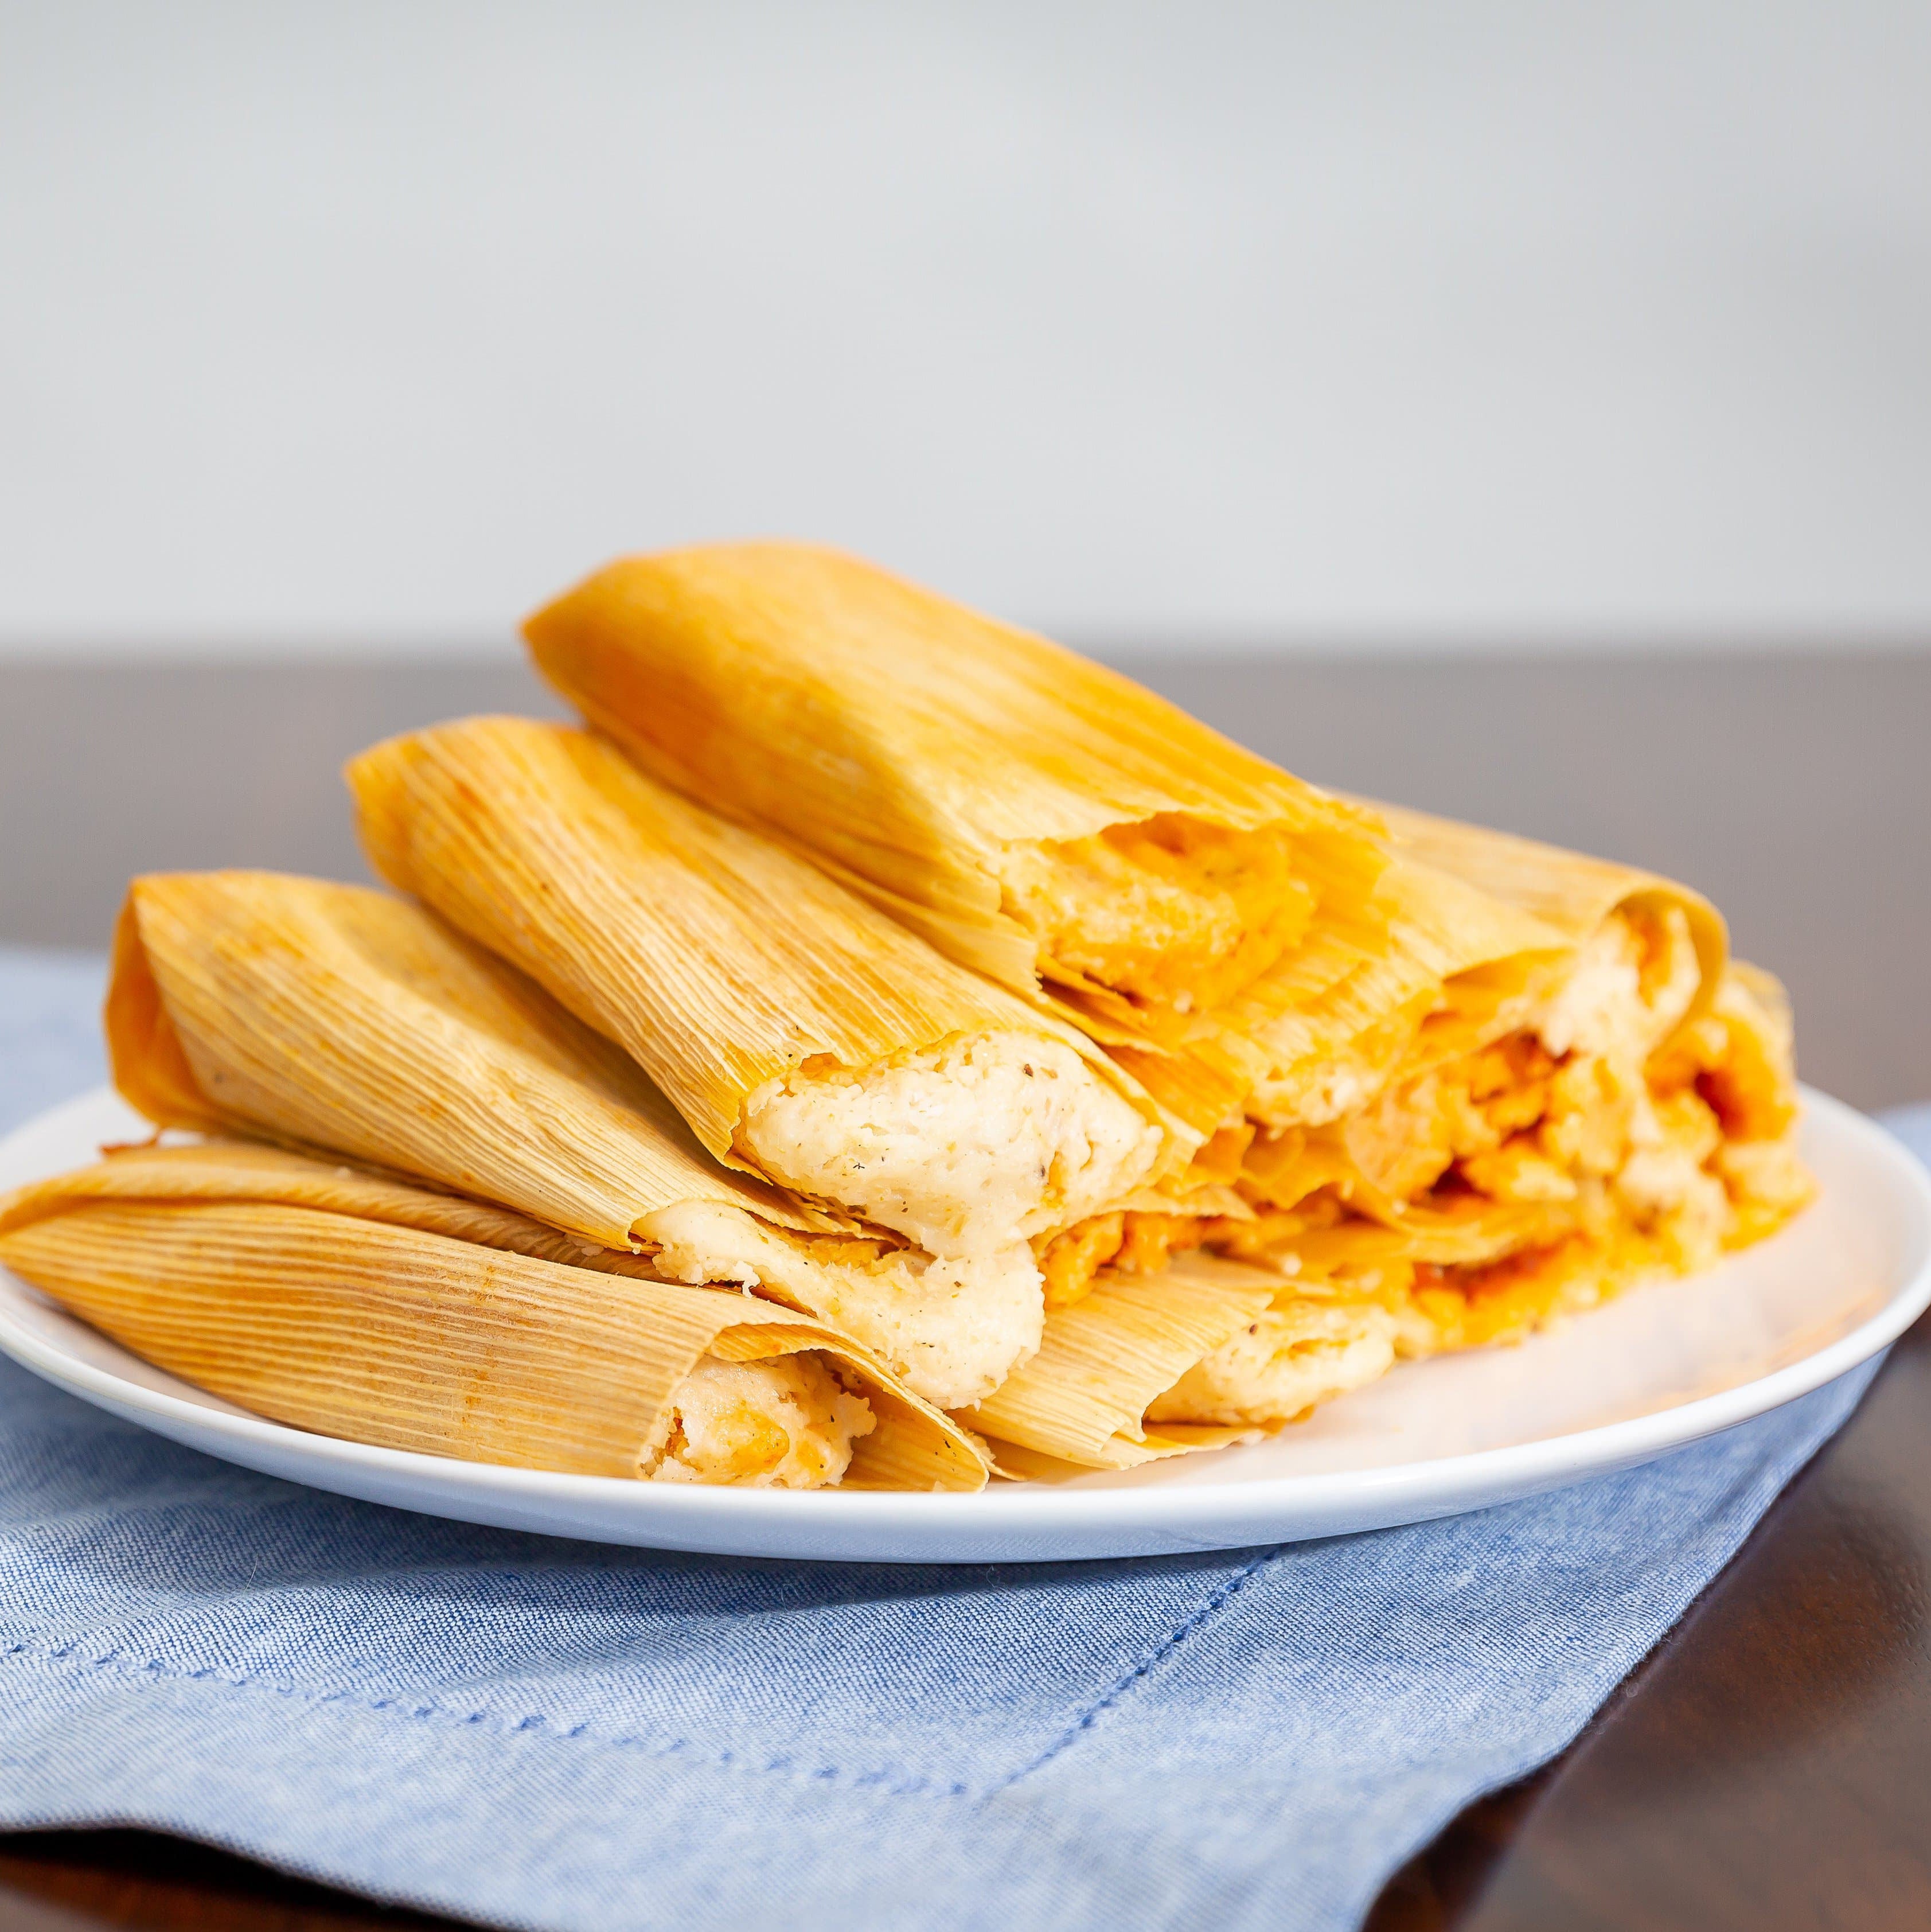 A plate of Hatch Green Chile Cheese Tamales, presented on a white plate resting on a blue cloth on a wooden table.